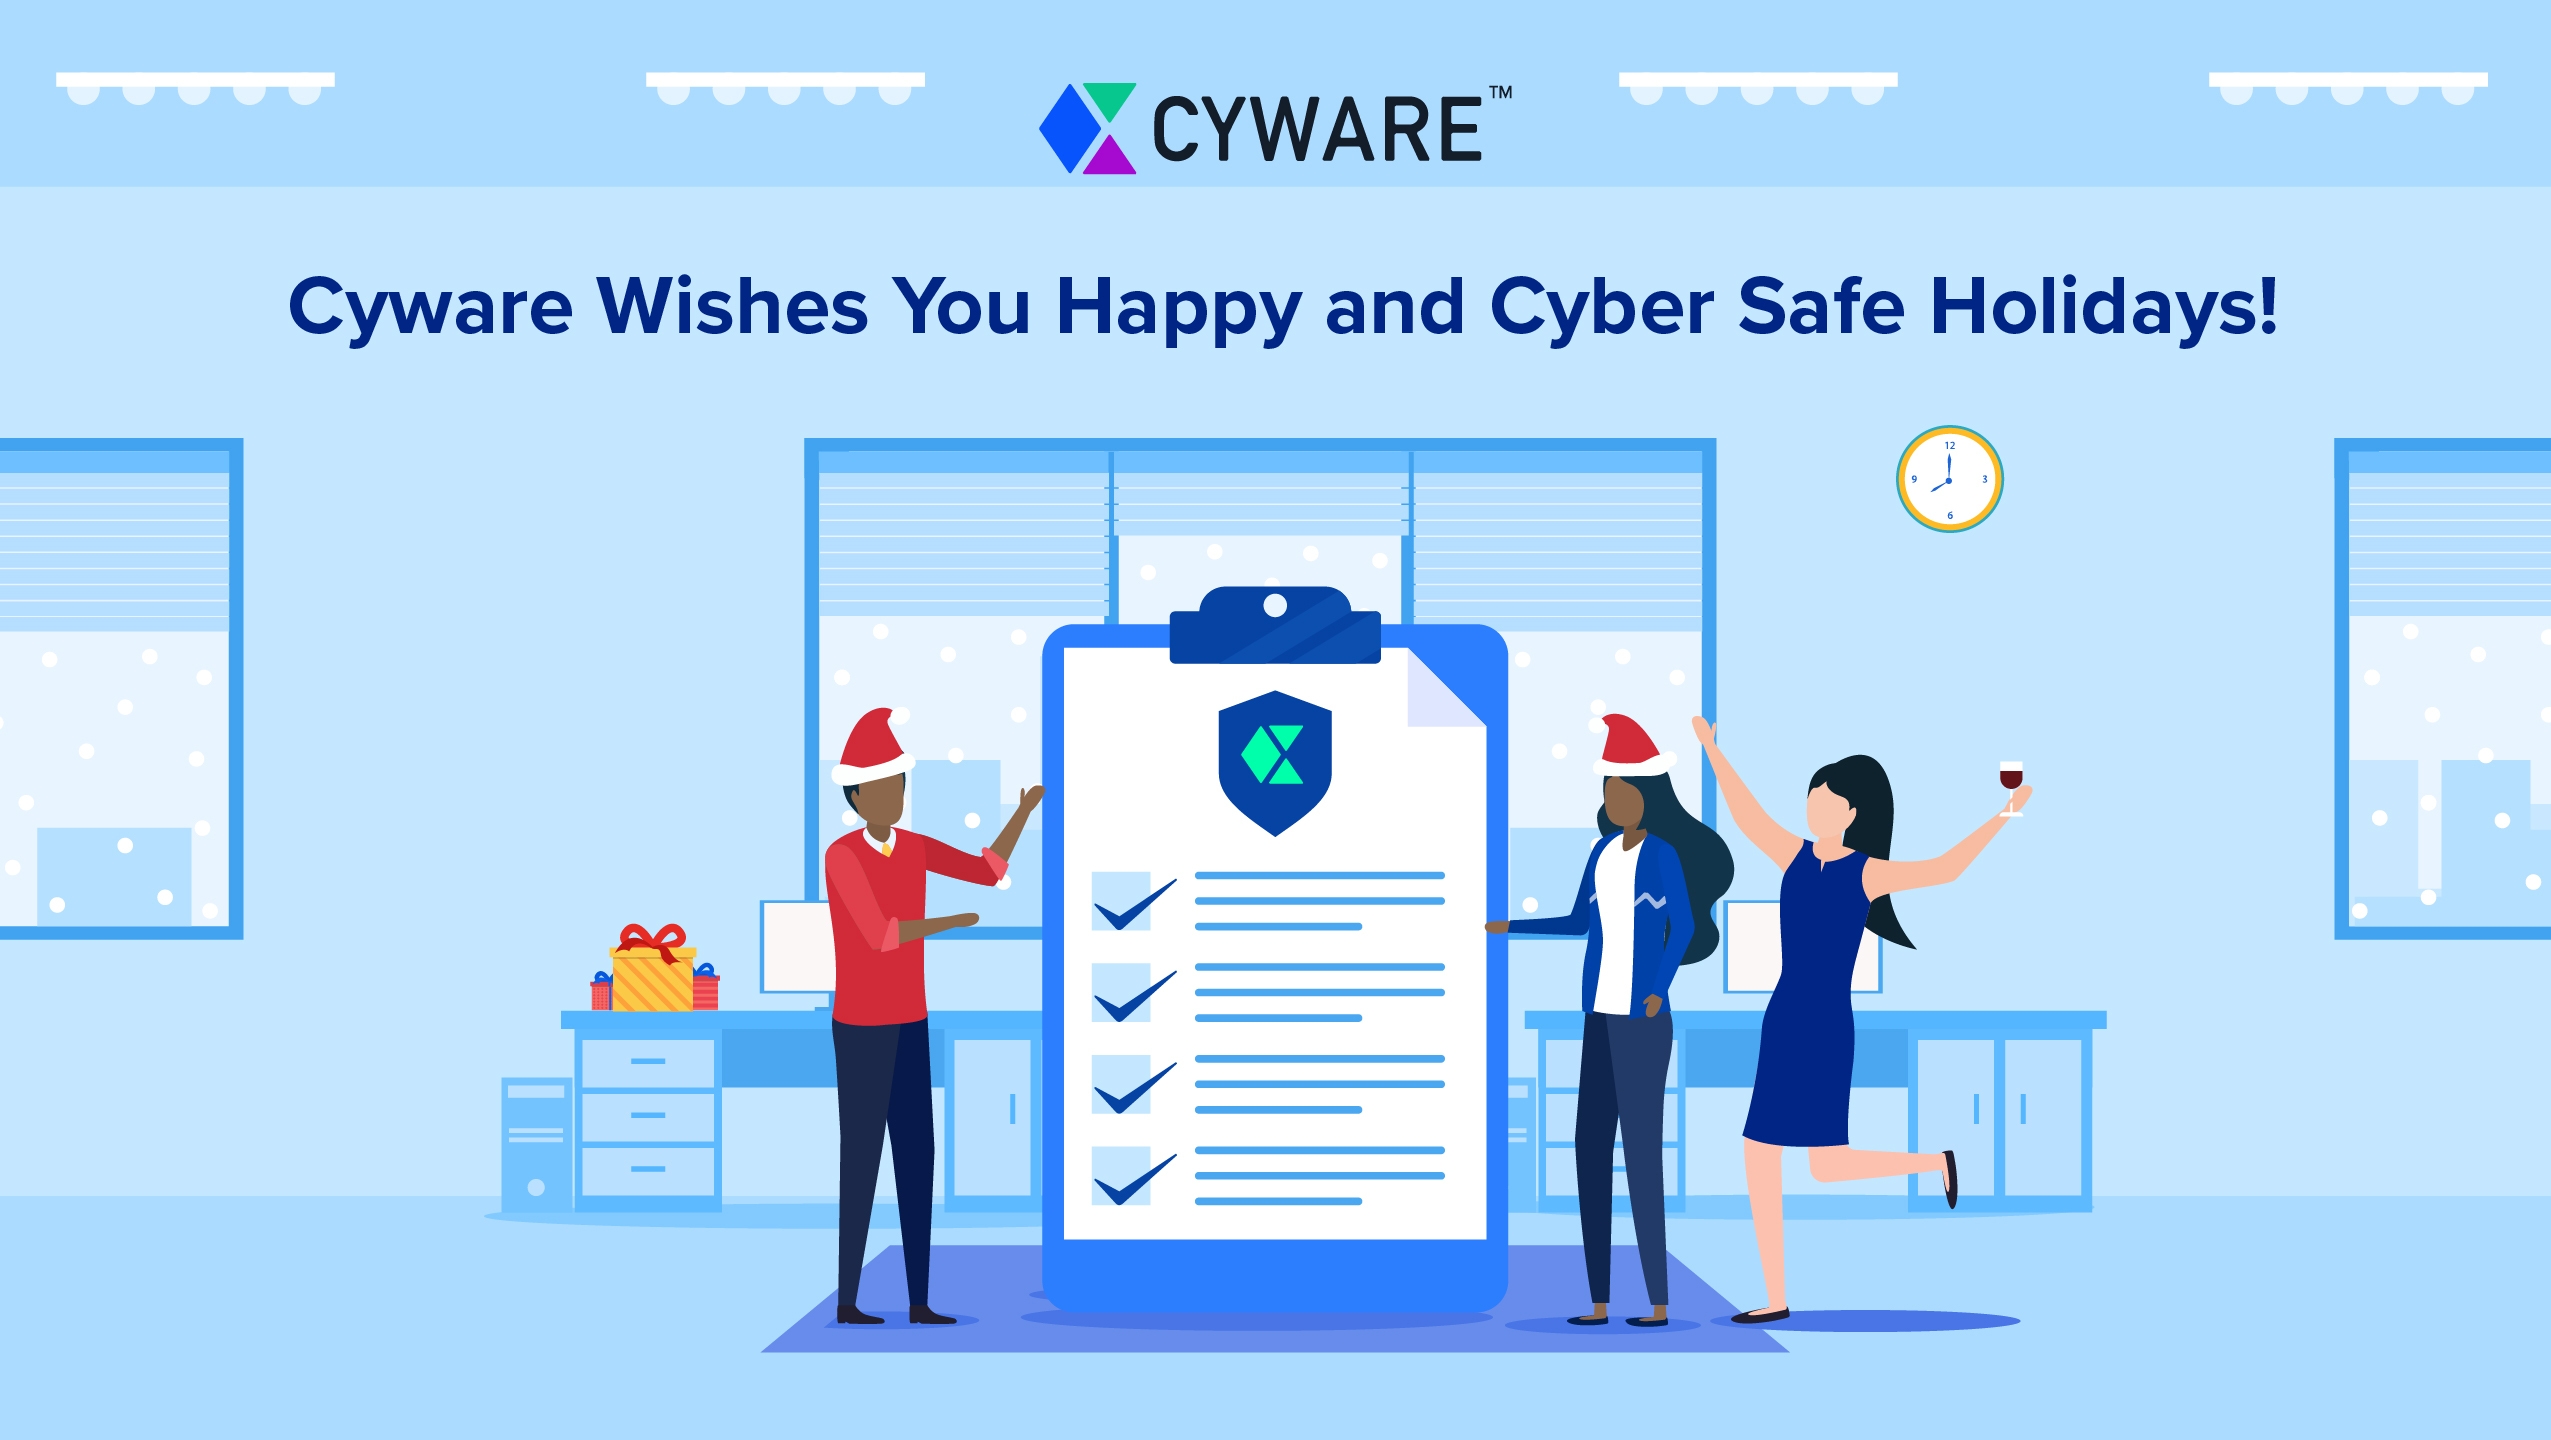 Are You Ready with Your Cybersecurity Checklist for the Holiday Season?